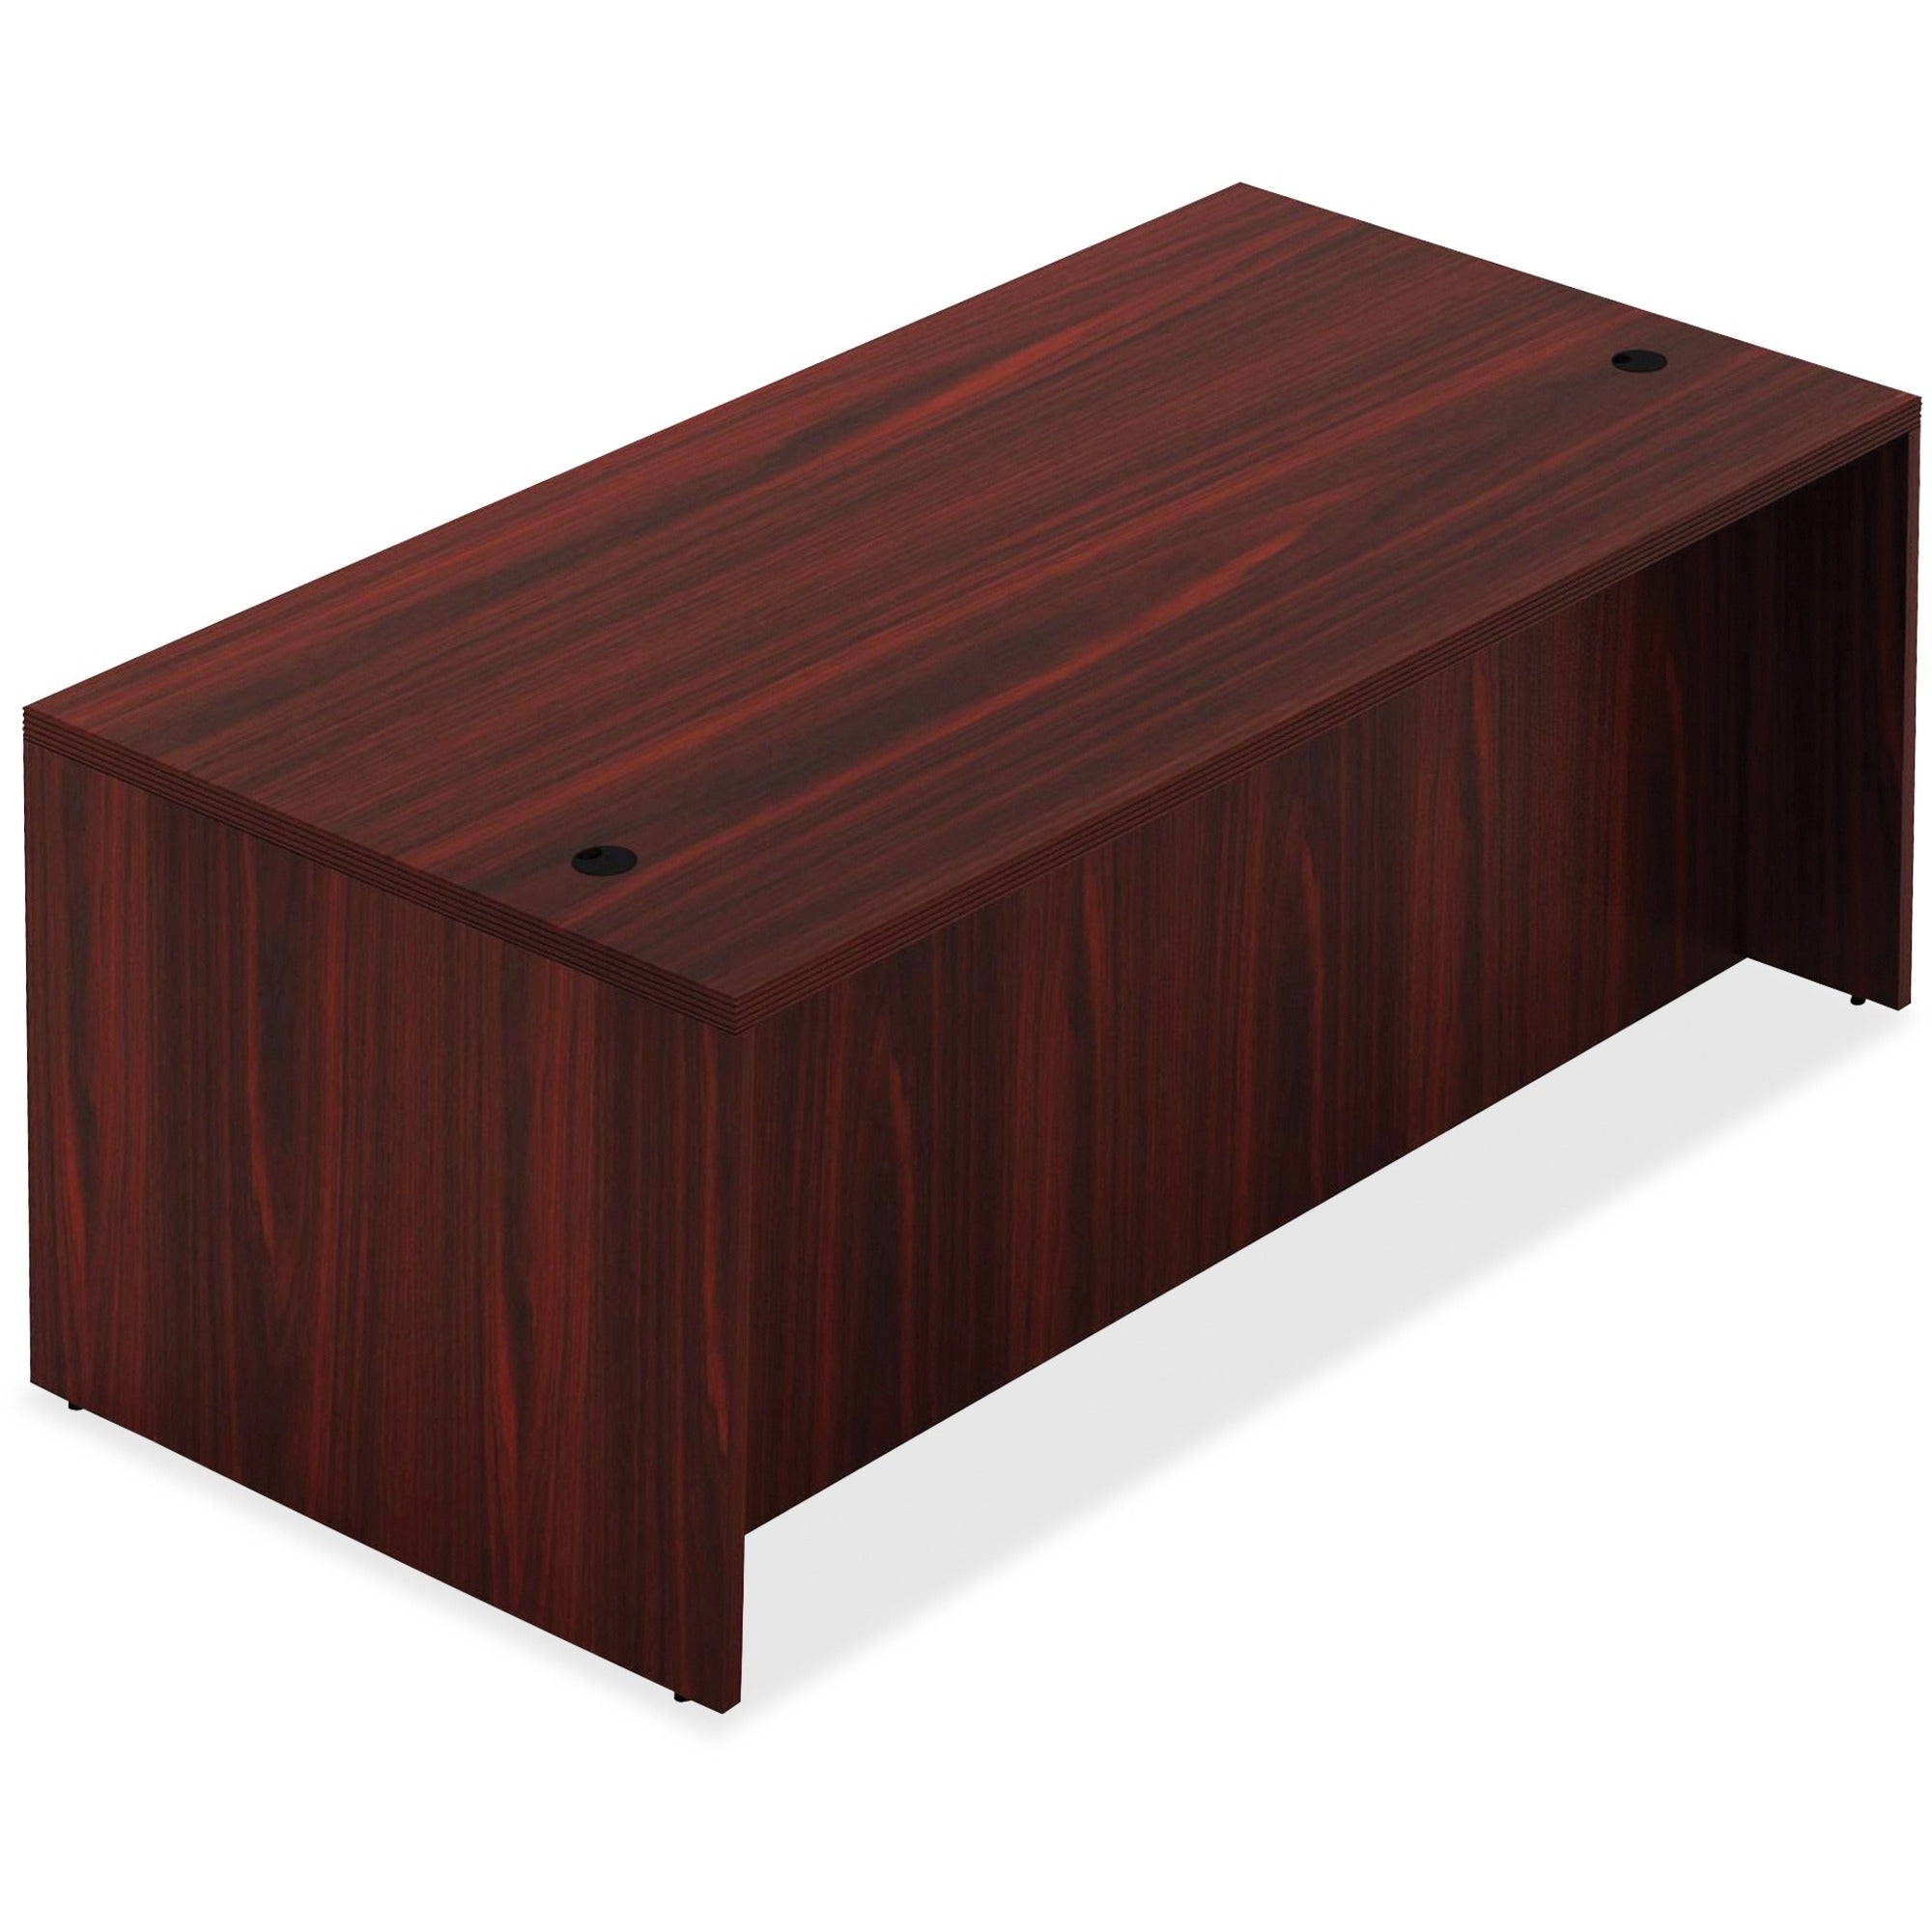 Lorell Chateau Series Rectangular desk - 66.1" x 29.5"30" Table, 1.5" Table Top - Reeded Edge - Material: P2 Particleboard - Finish: Mahogany Laminate - Durable, Modesty Panel, Grommet - For Office - 